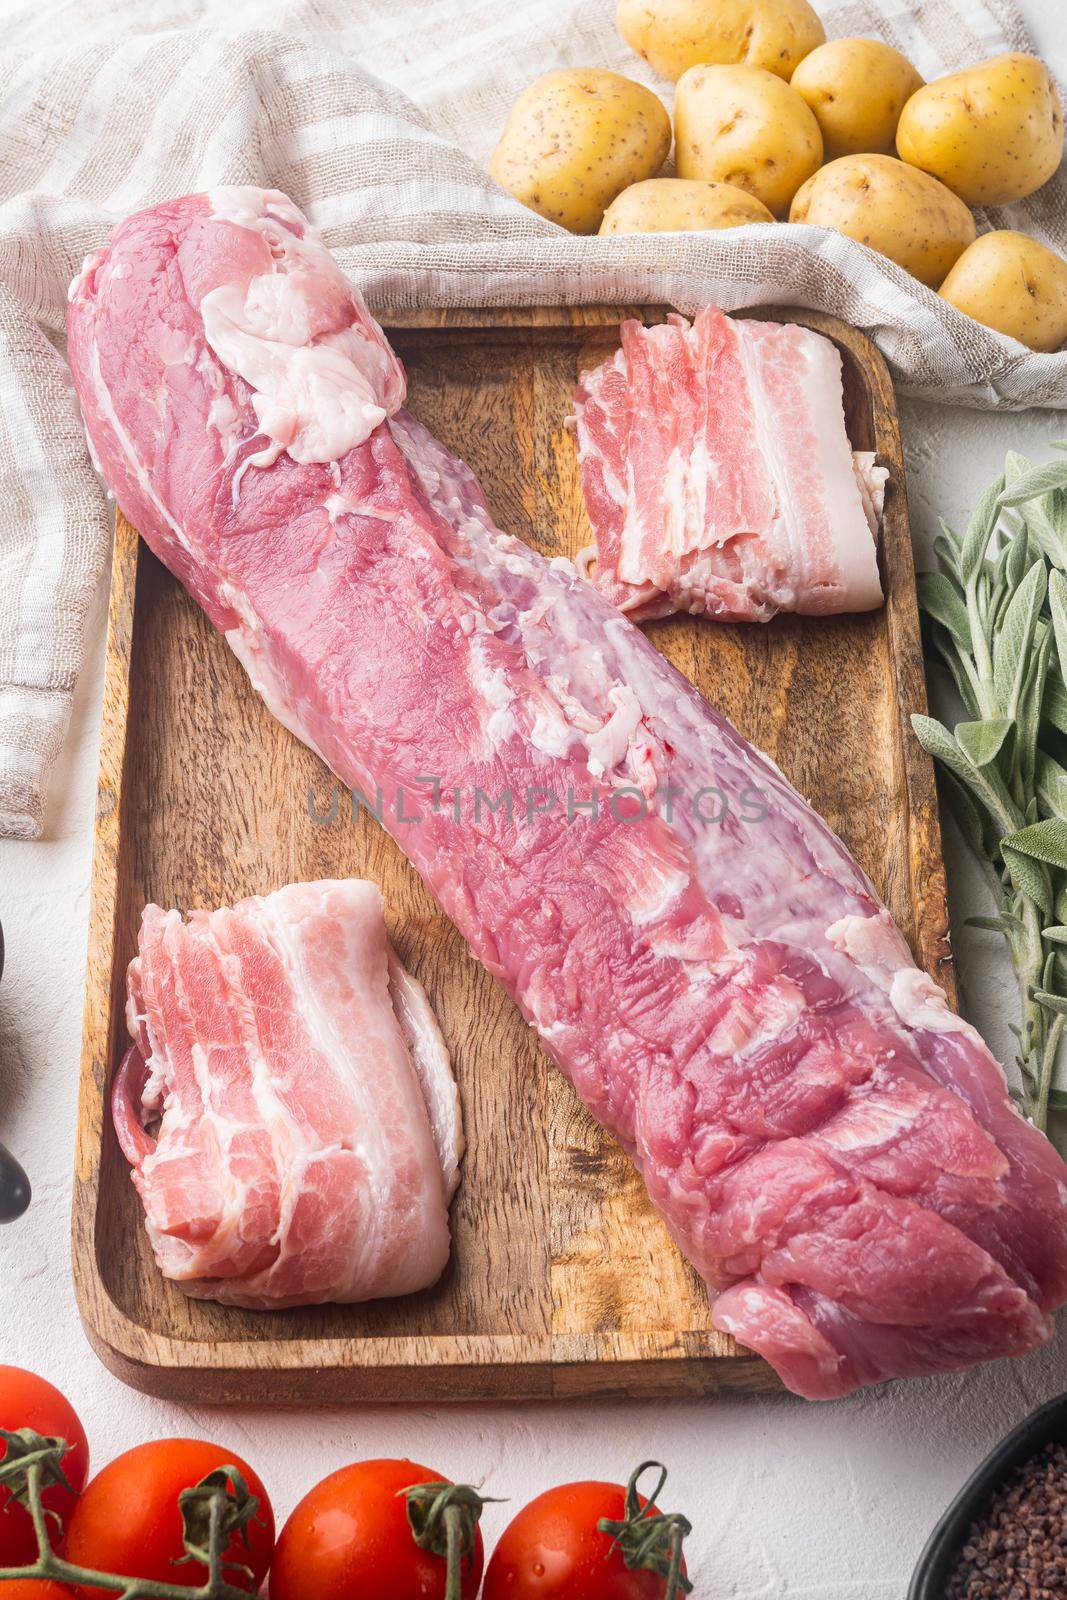 Raw pork loin with ingredients and herbs for baking, sage, potatoe set, on wooden tray, on white stone background